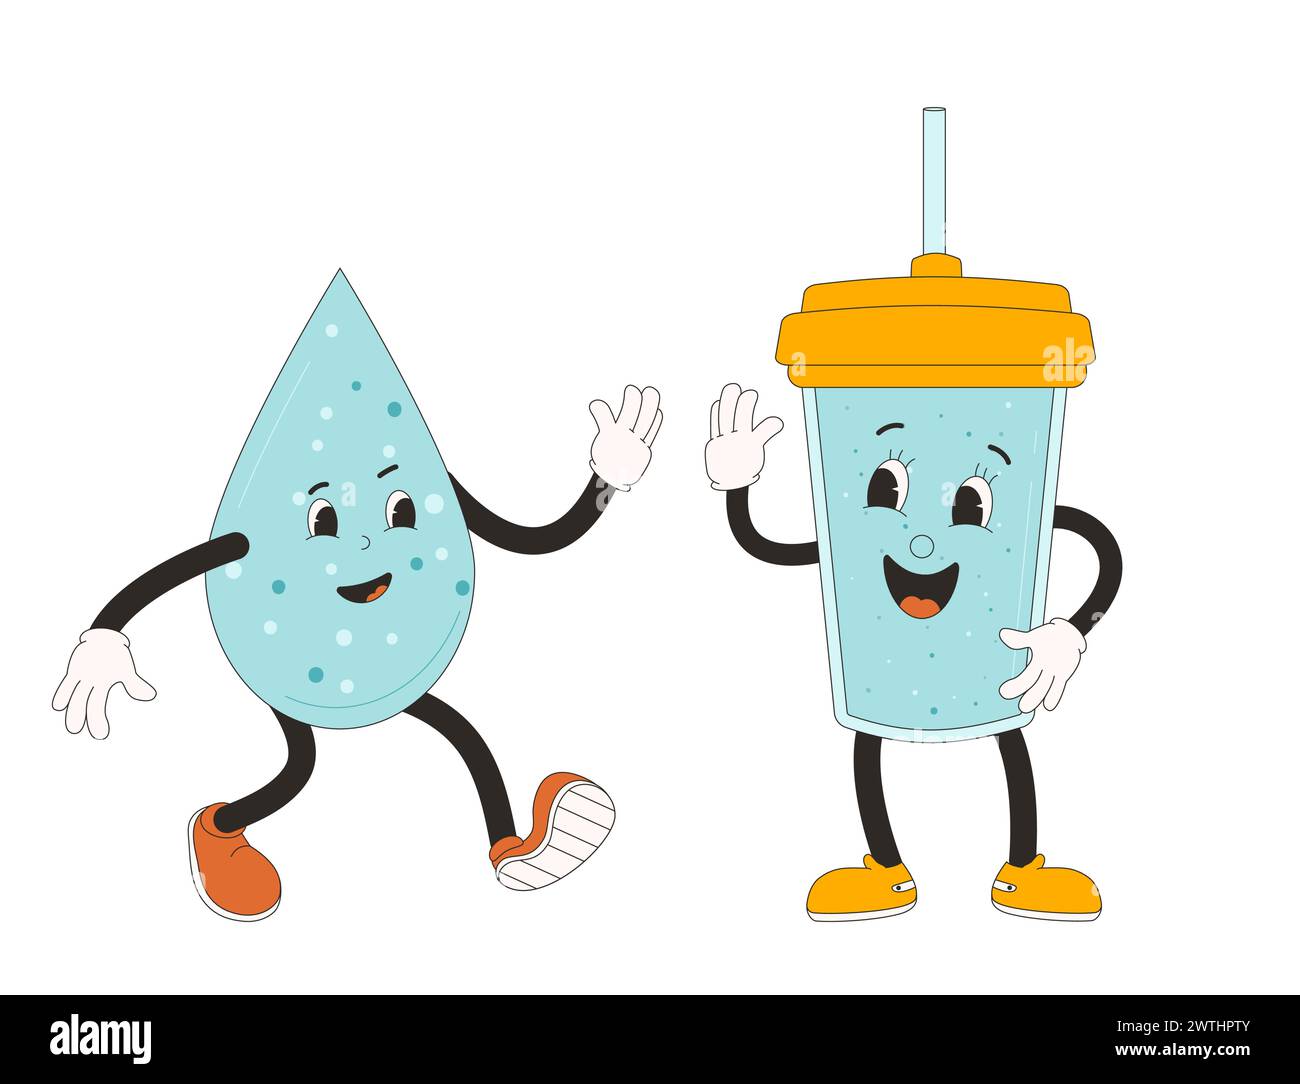 Water drop and glass retro cartoon mascots. Drink rubber hose animation style groovy characters. Drink more water. Ecologic and wellness vector flat i Stock Vector